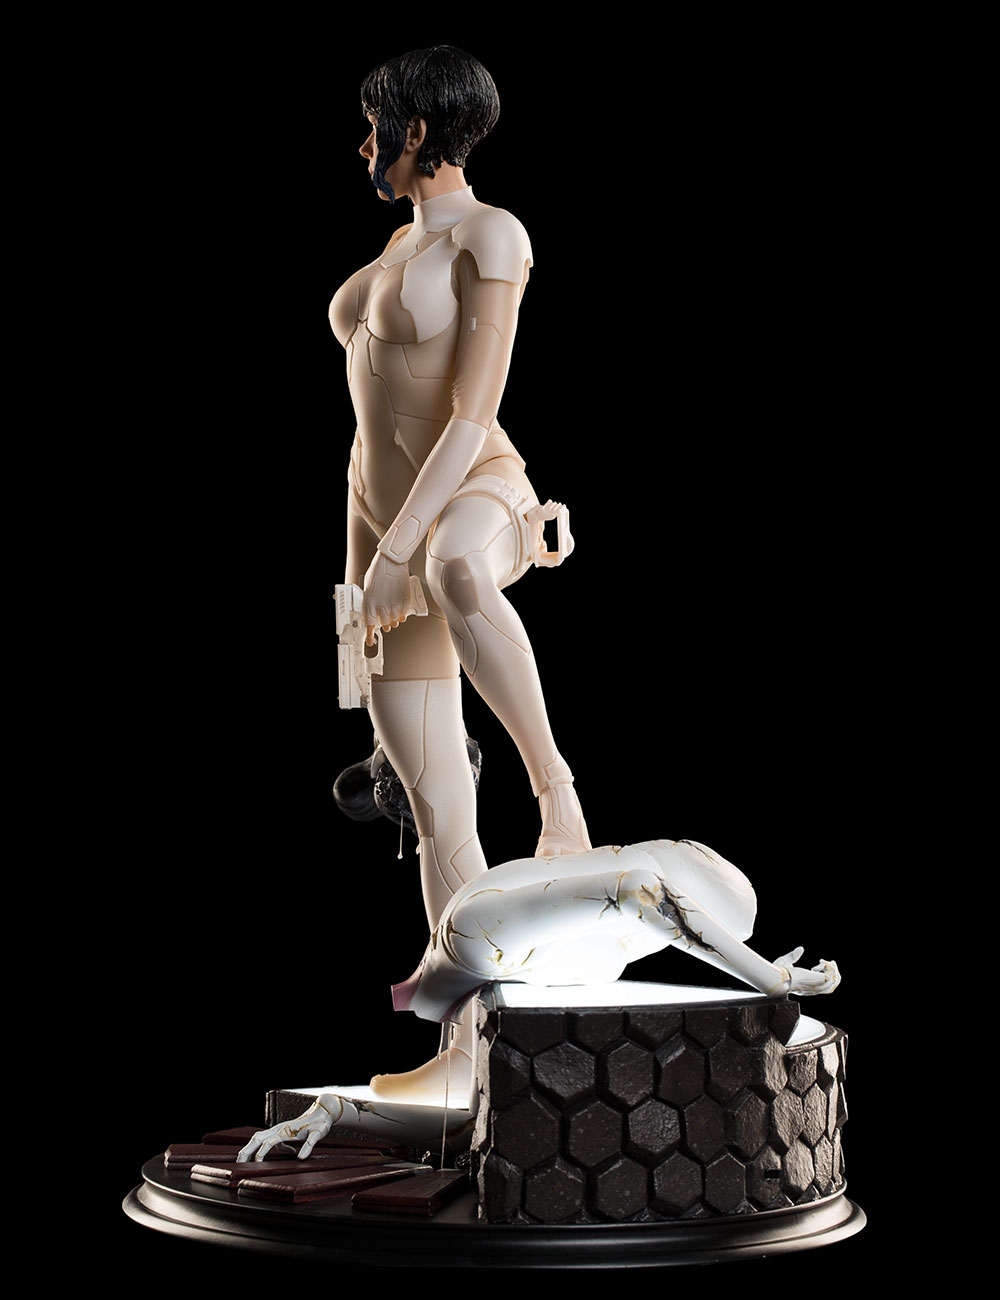 The Ghost In The Shell Movie Has Some Very Expensive Statues